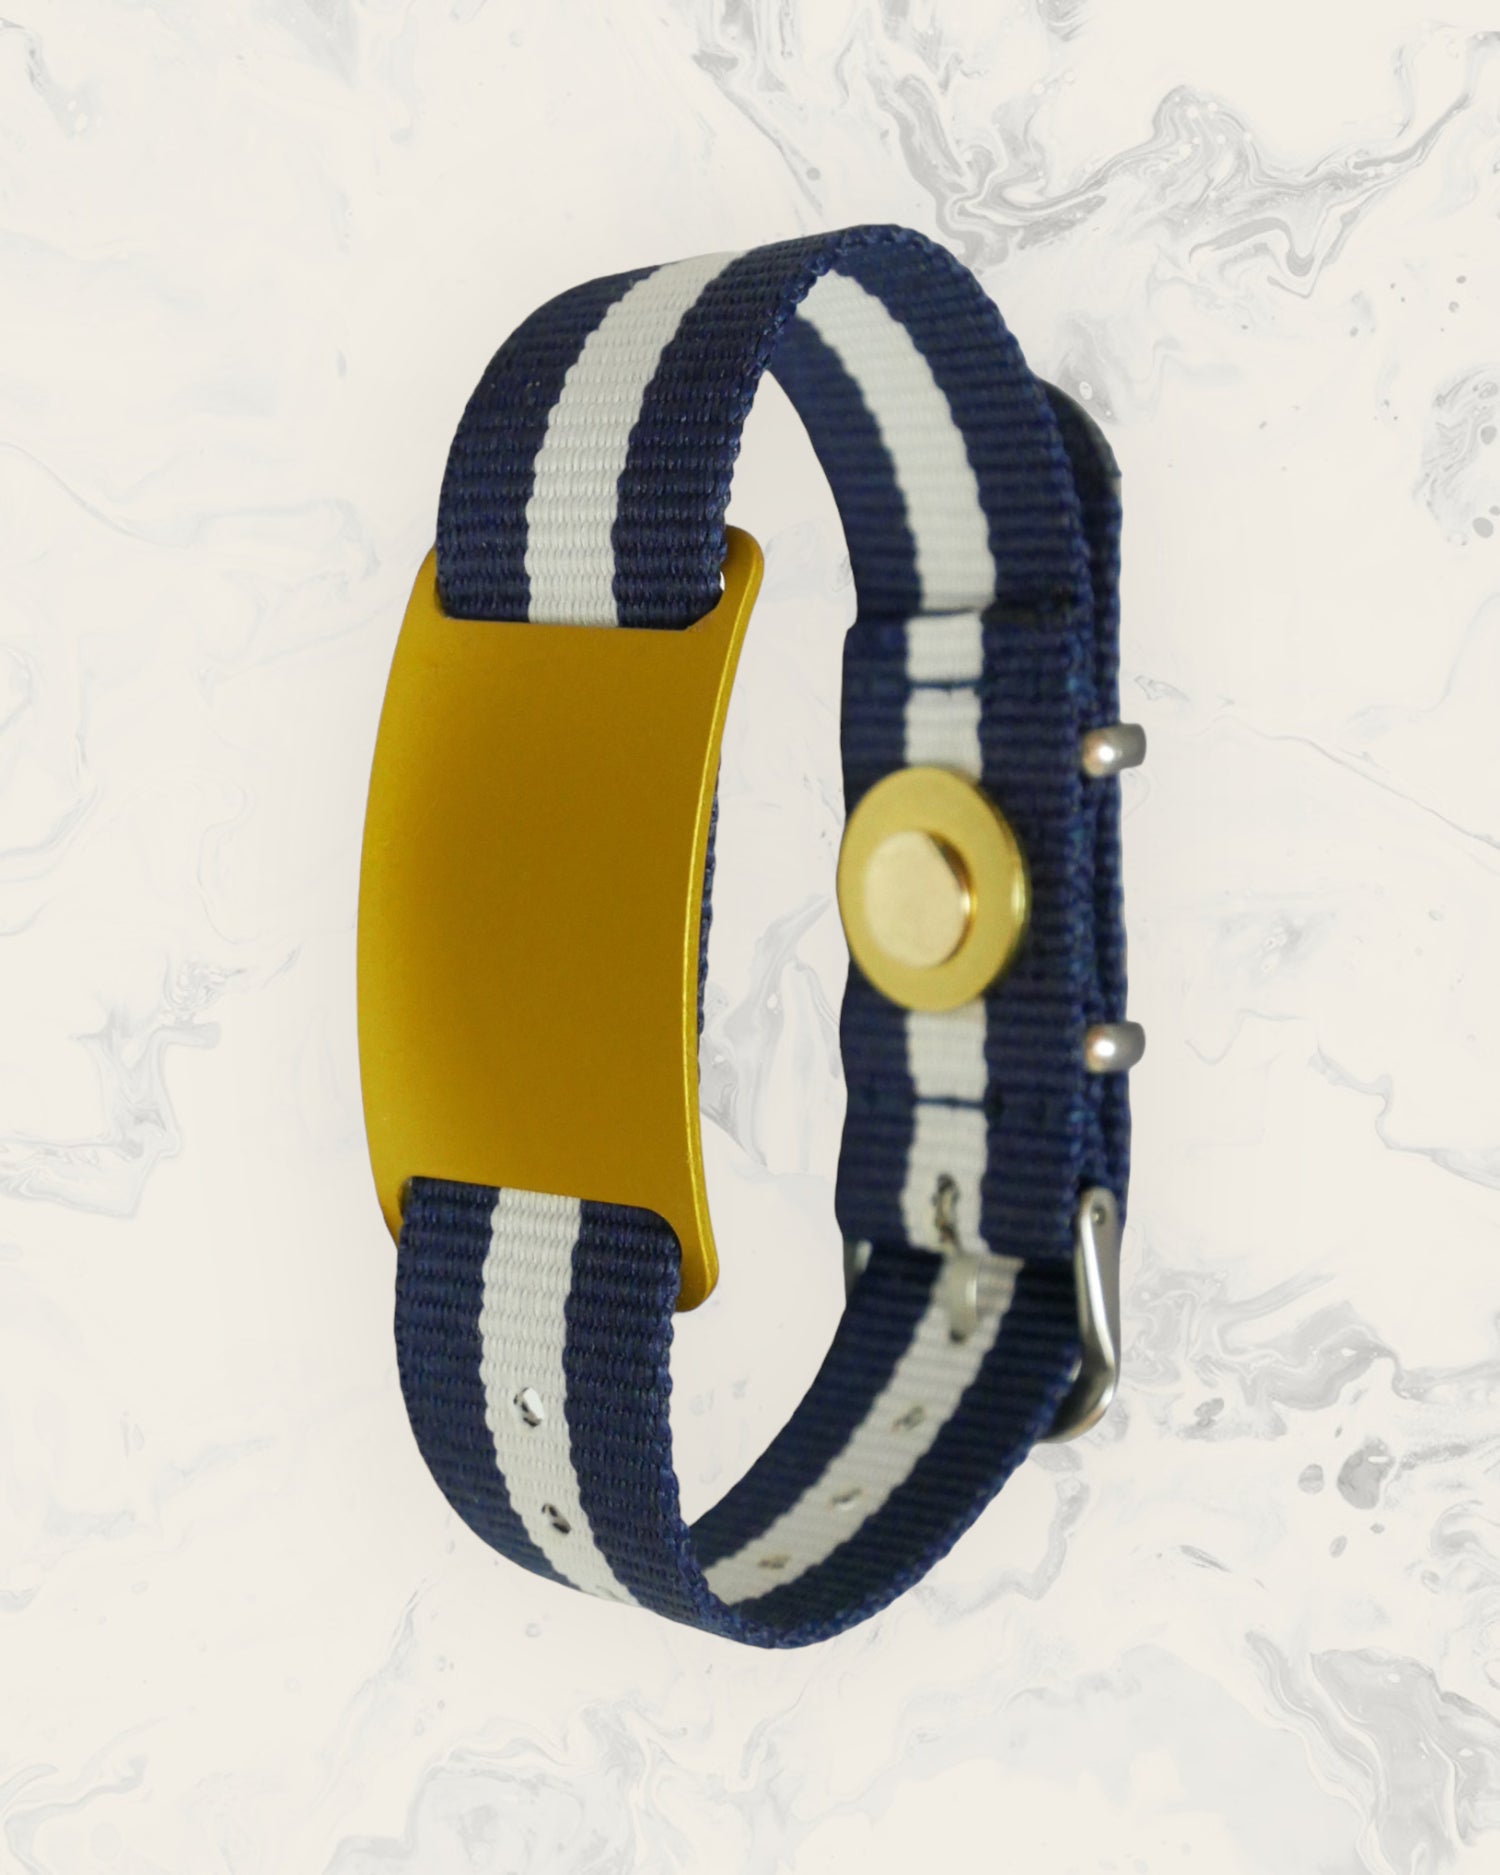 Natural Pain Relief and EMF Protection Bracelet Nylon Band Color Navy Blue and White Striped with a Gold Slider